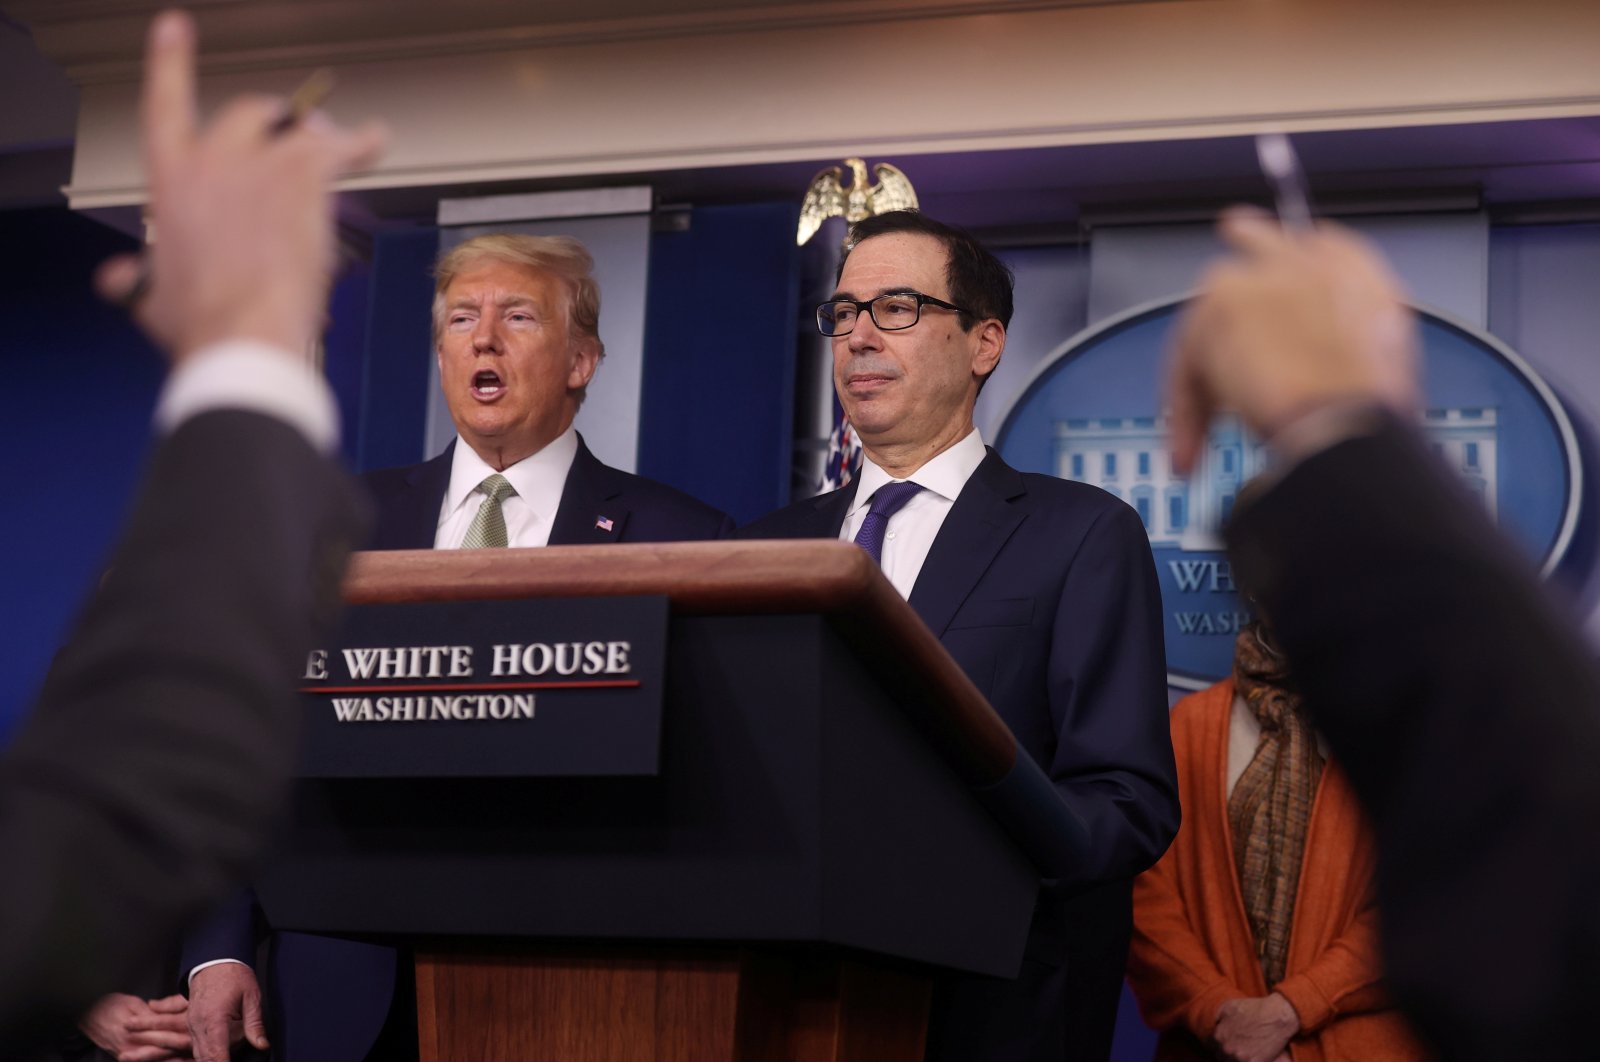 U.S. President Donald Trump and Treasury Secretary Steven Mnuchin answer questions during the Trump administration's daily coronavirus briefing at the White House in Washington, U.S., March 17, 2020. (REUTERS Photo)